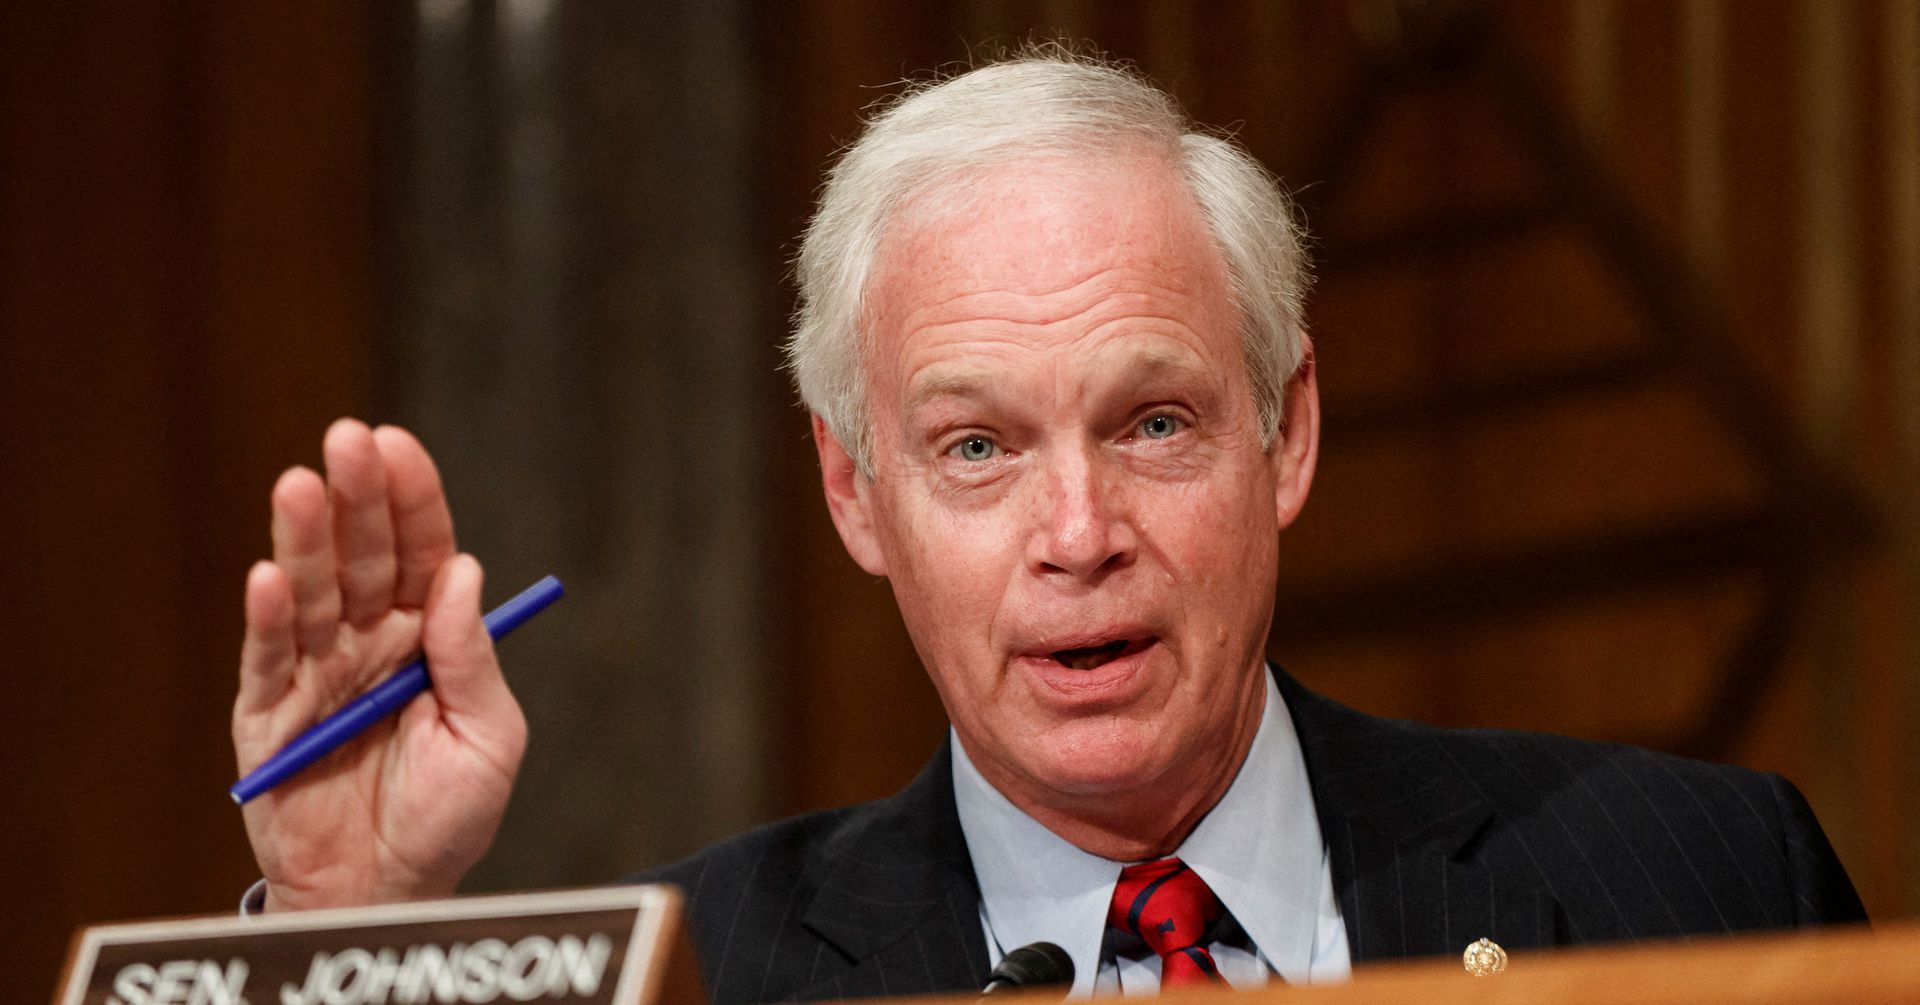 Sen Johnson “my Eyes Have Been Opened To Pervasive Corruption In Federal Agencies” One